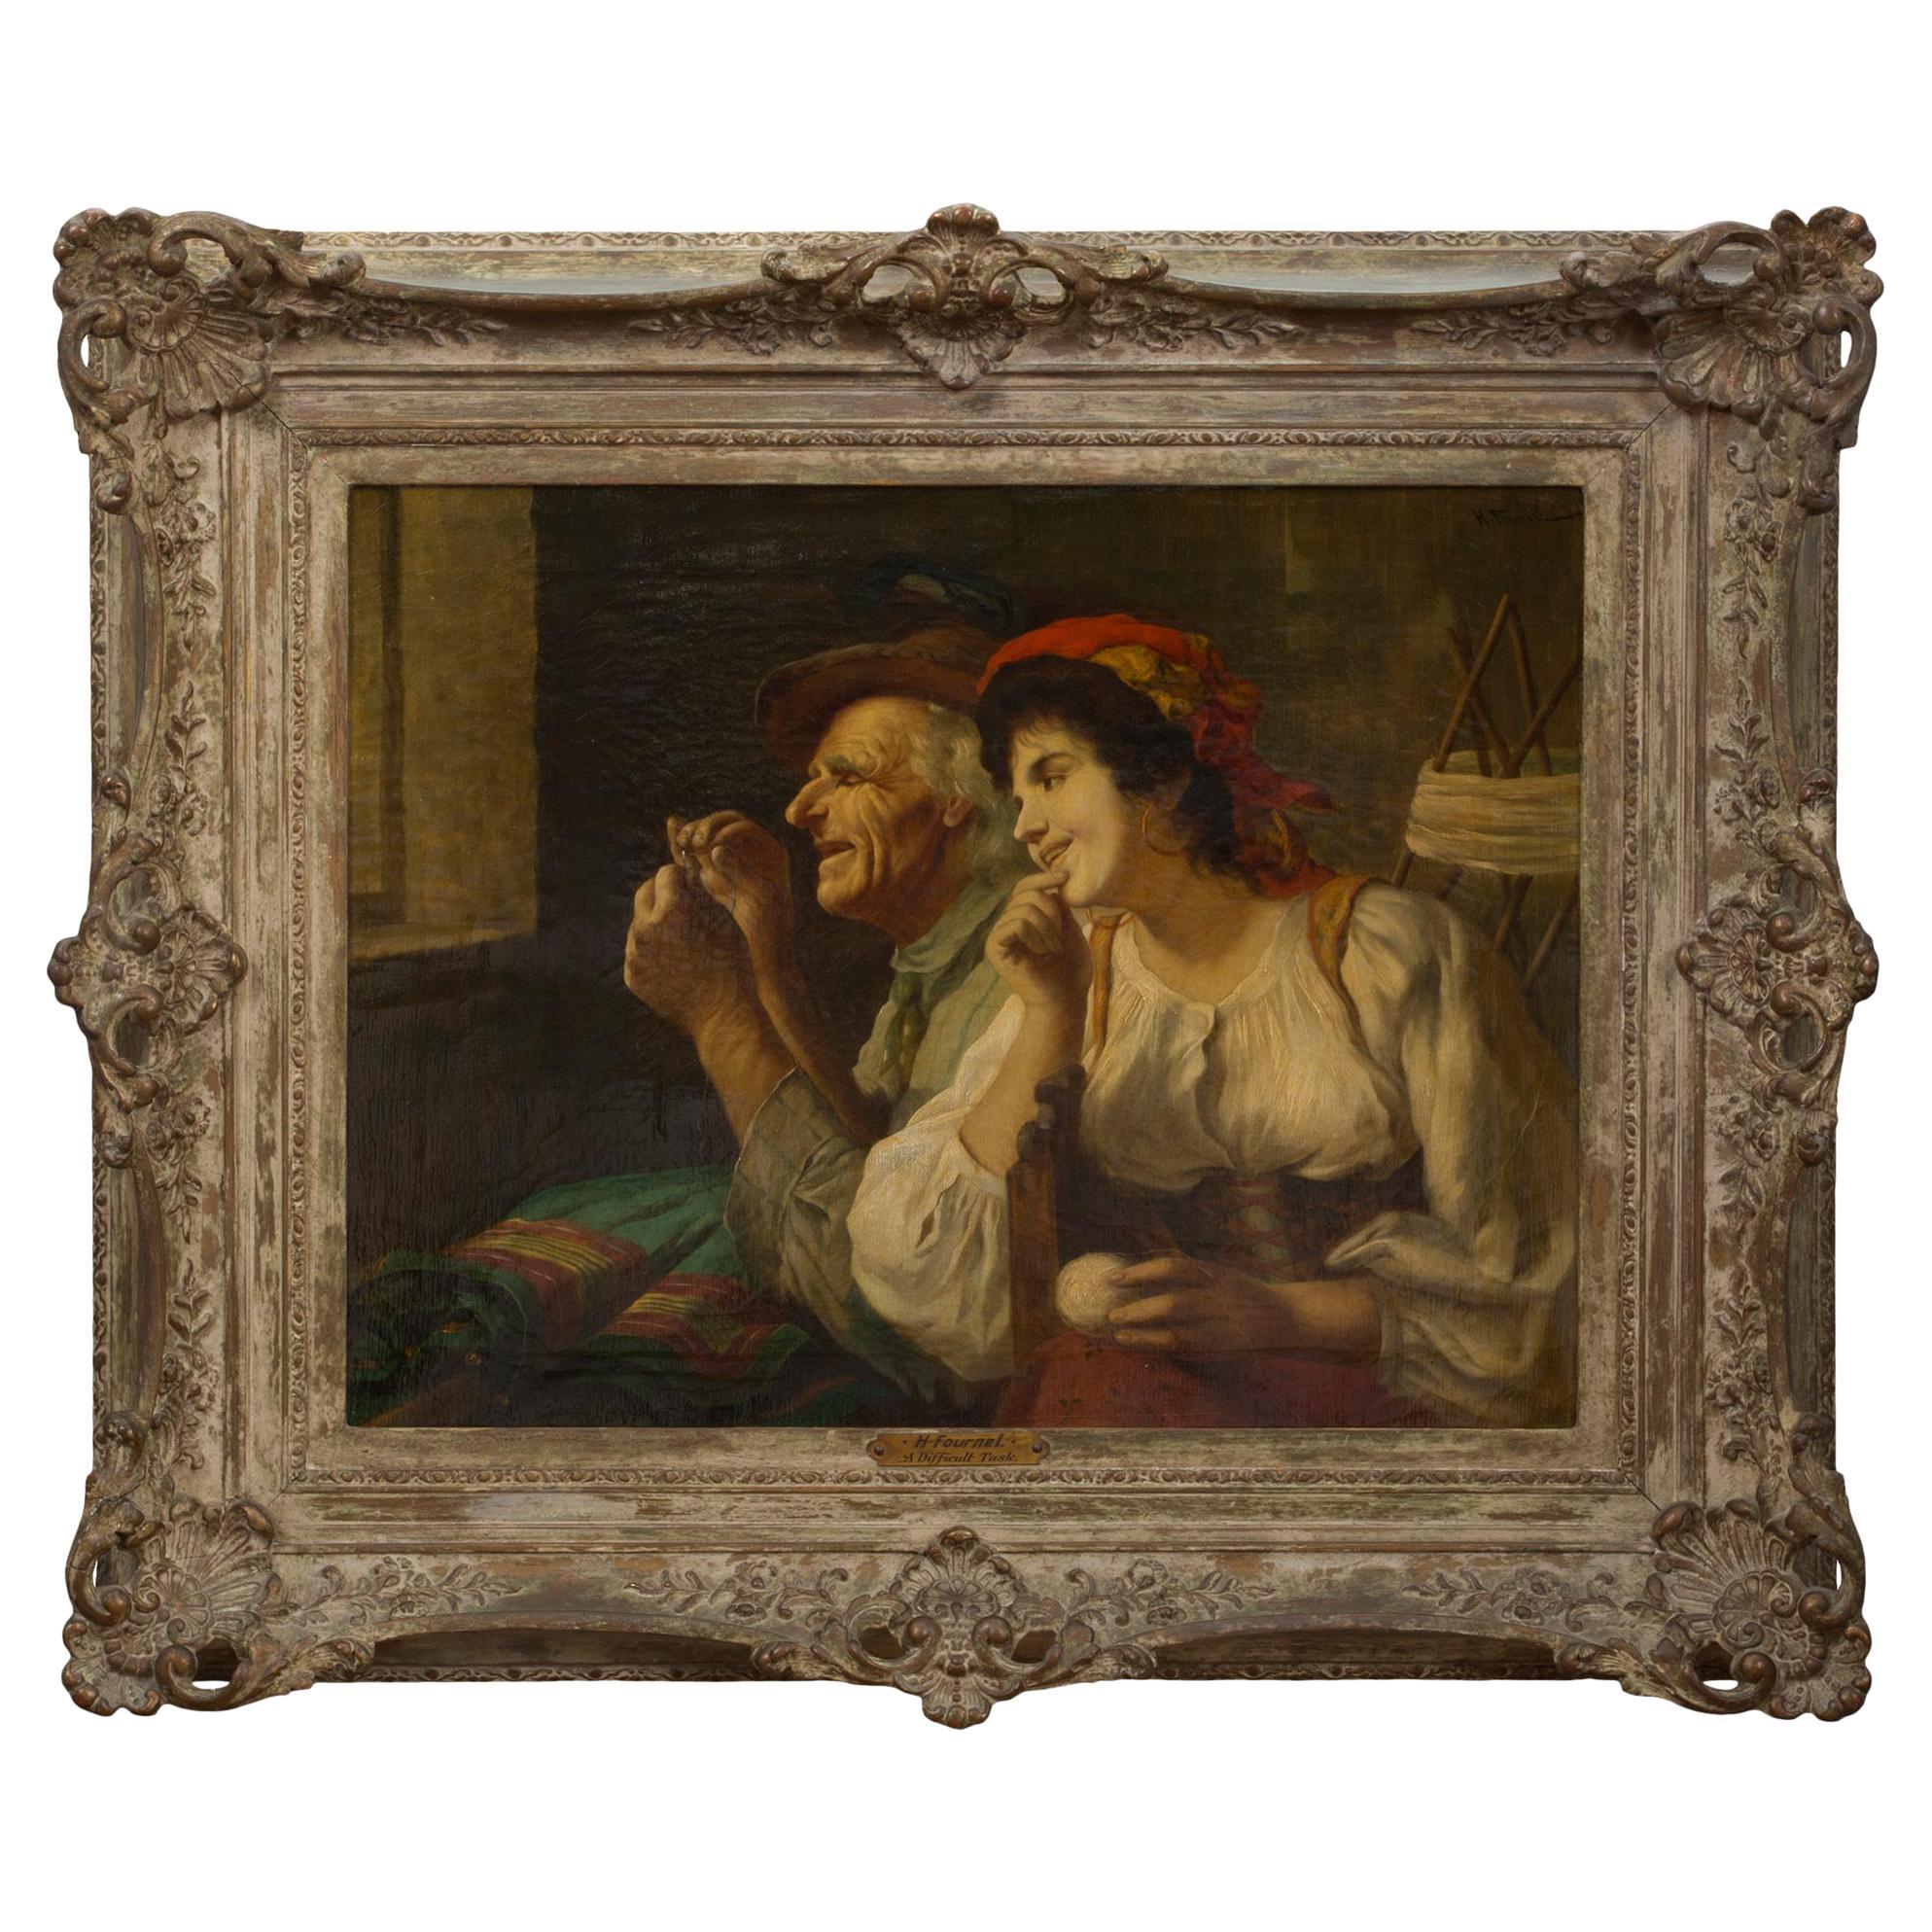 19th Century Signed H. Fournel Oil on Canvas Titled ‘A Difficult Task’